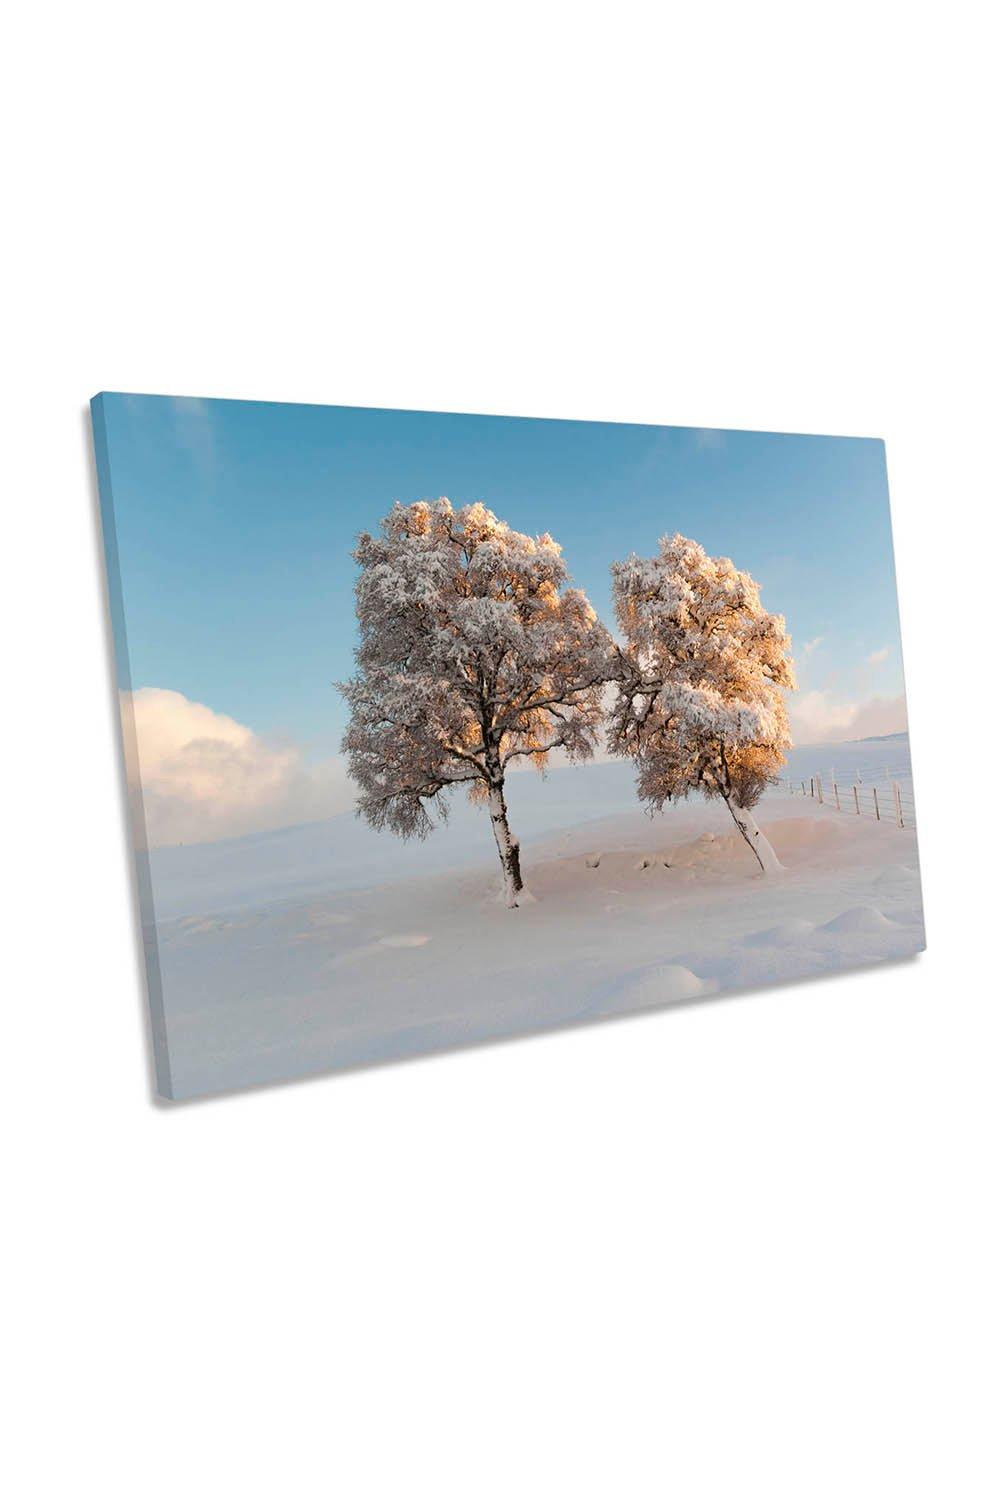 Twins Winter Landscape Trees Canvas Wall Art Picture Print